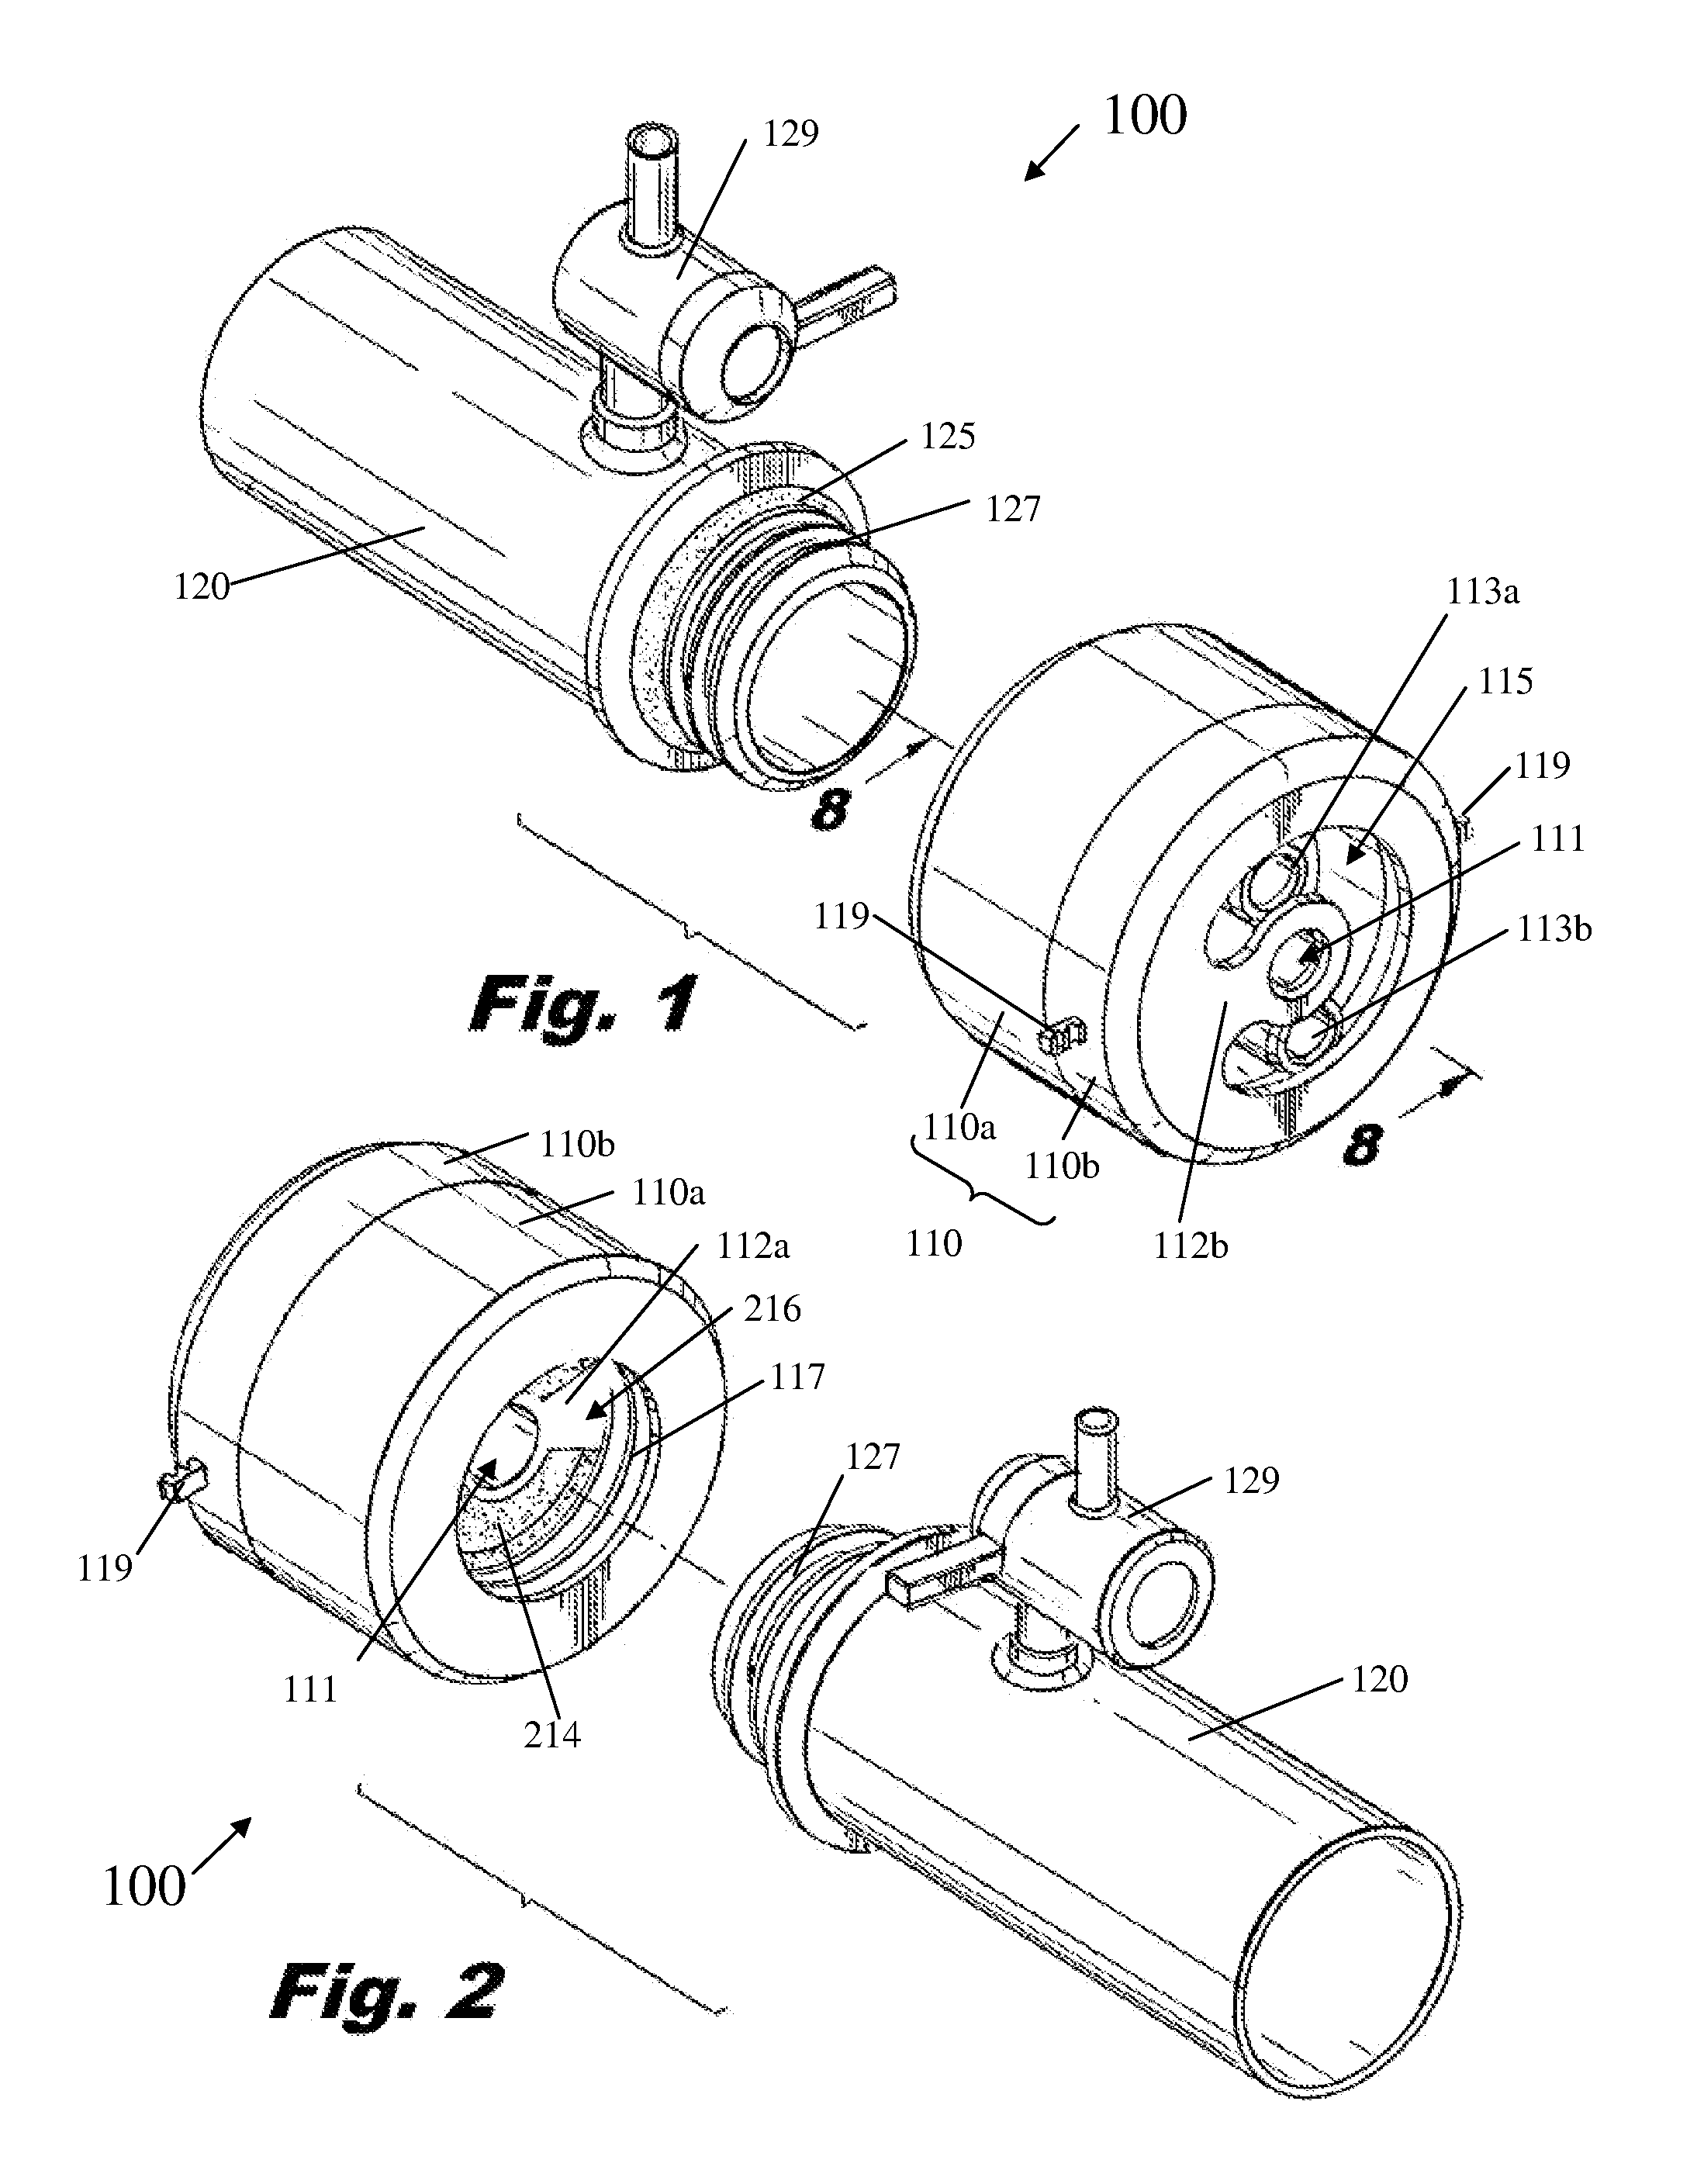 Surgical access device with moveable device port